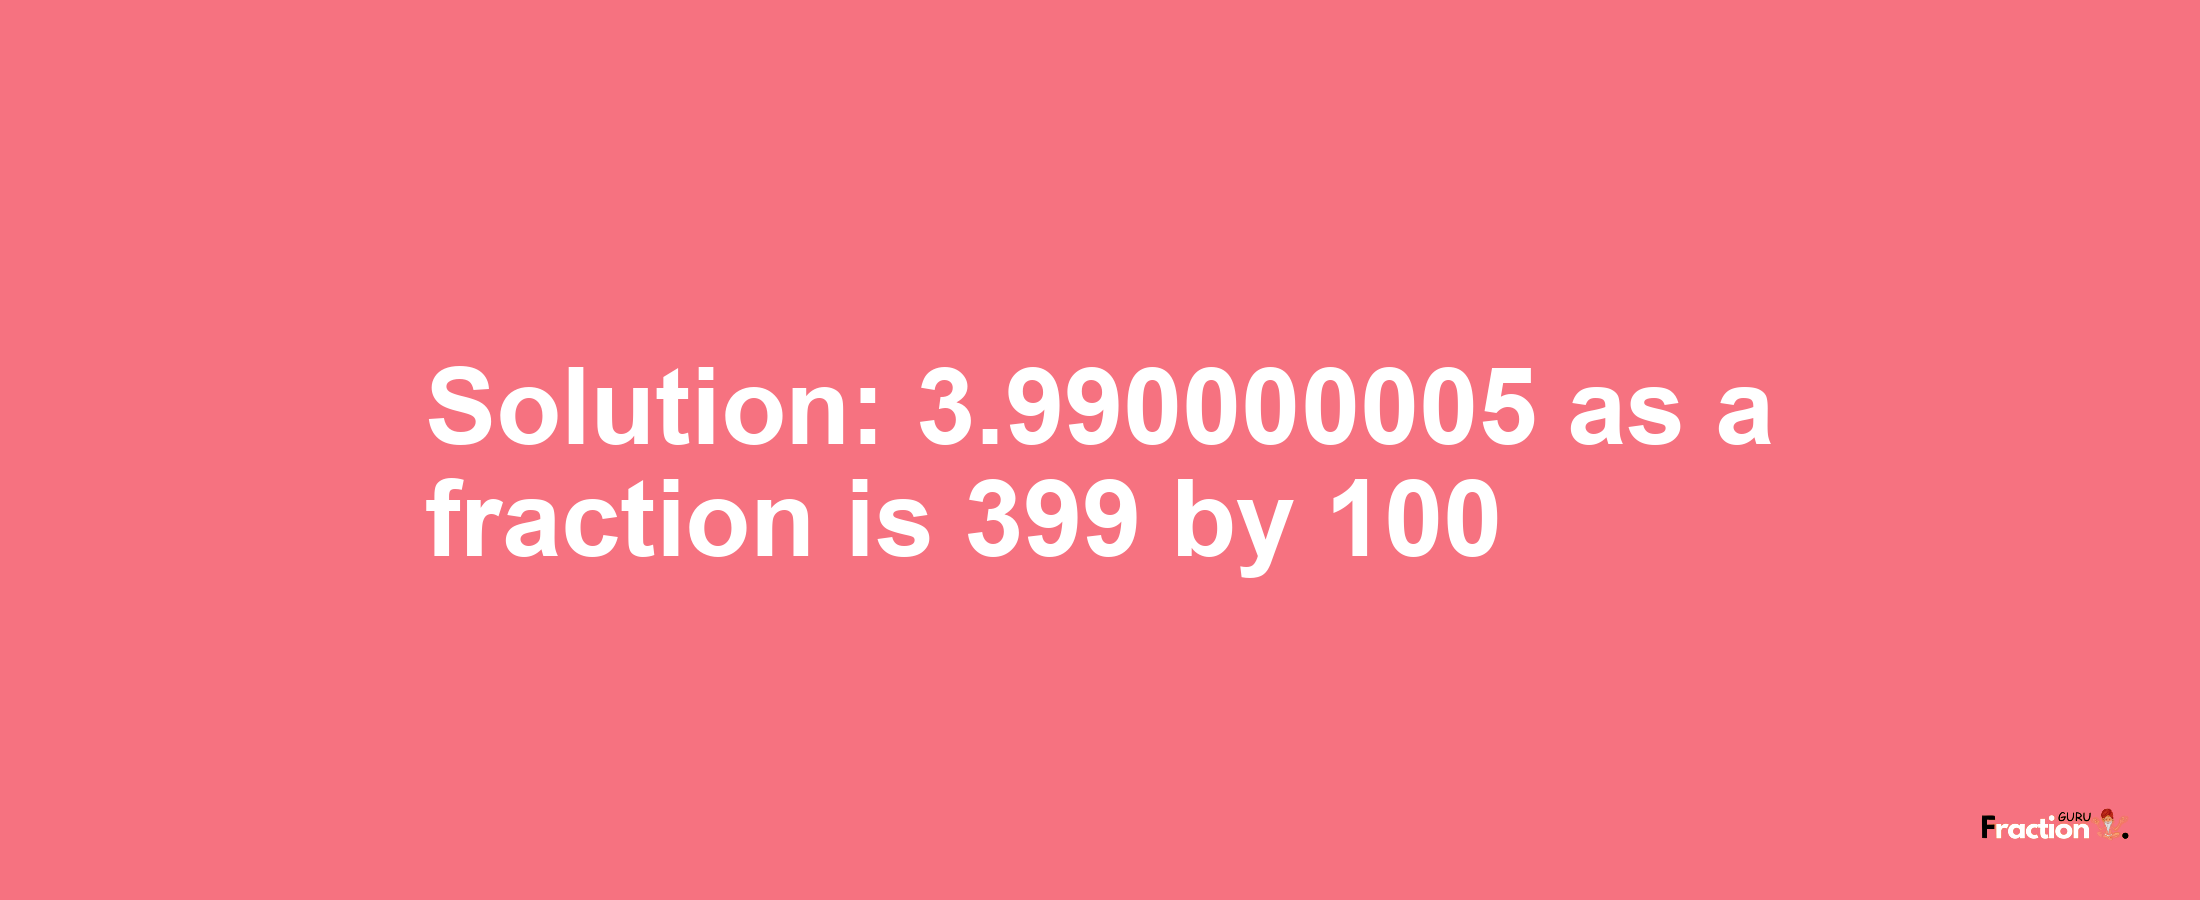 Solution:3.990000005 as a fraction is 399/100